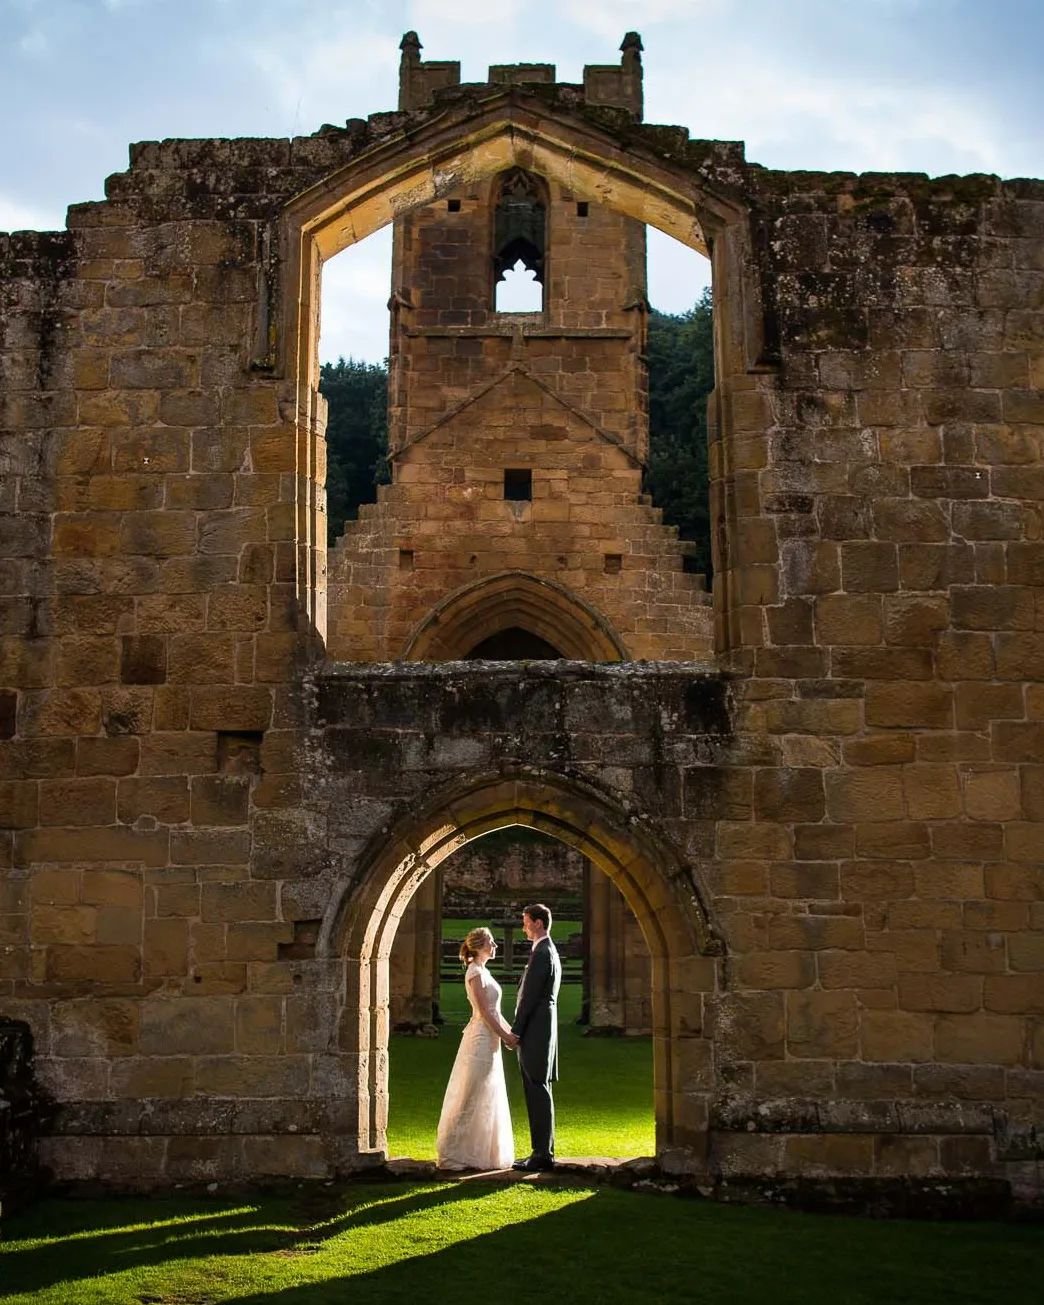 Frances &amp; Mike wanted a sunset portrait under the priory ruins so when the sun didn't play ball for us we created our own little bit of sunshine 🌞

#weddingportrait #ocf #northyorkshireweddings
#northyorkshireweddingphotographer
#wedding
#mountg